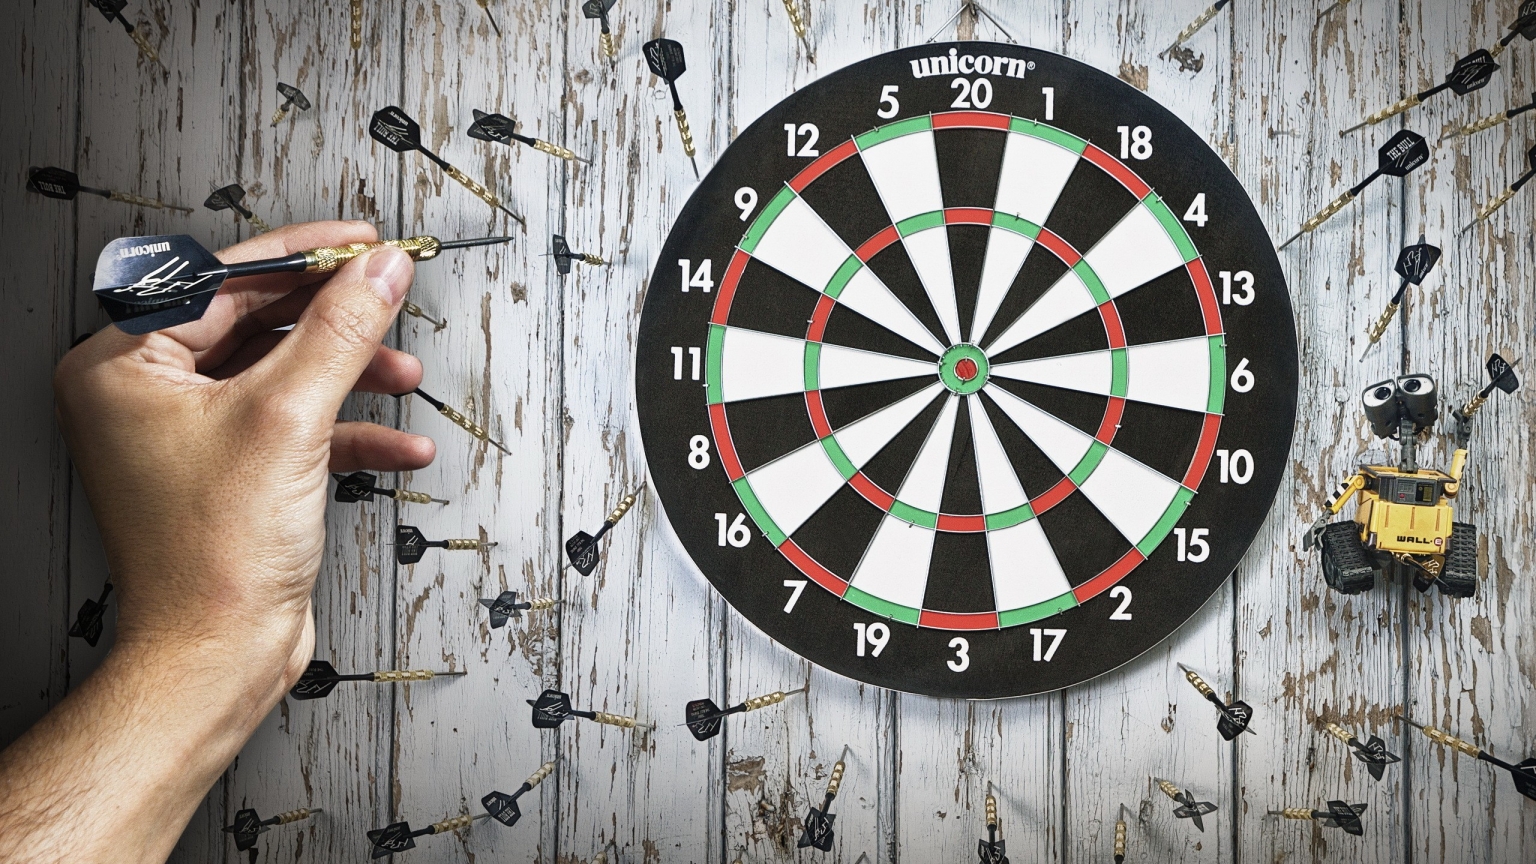 Darts Game for 1536 x 864 HDTV resolution